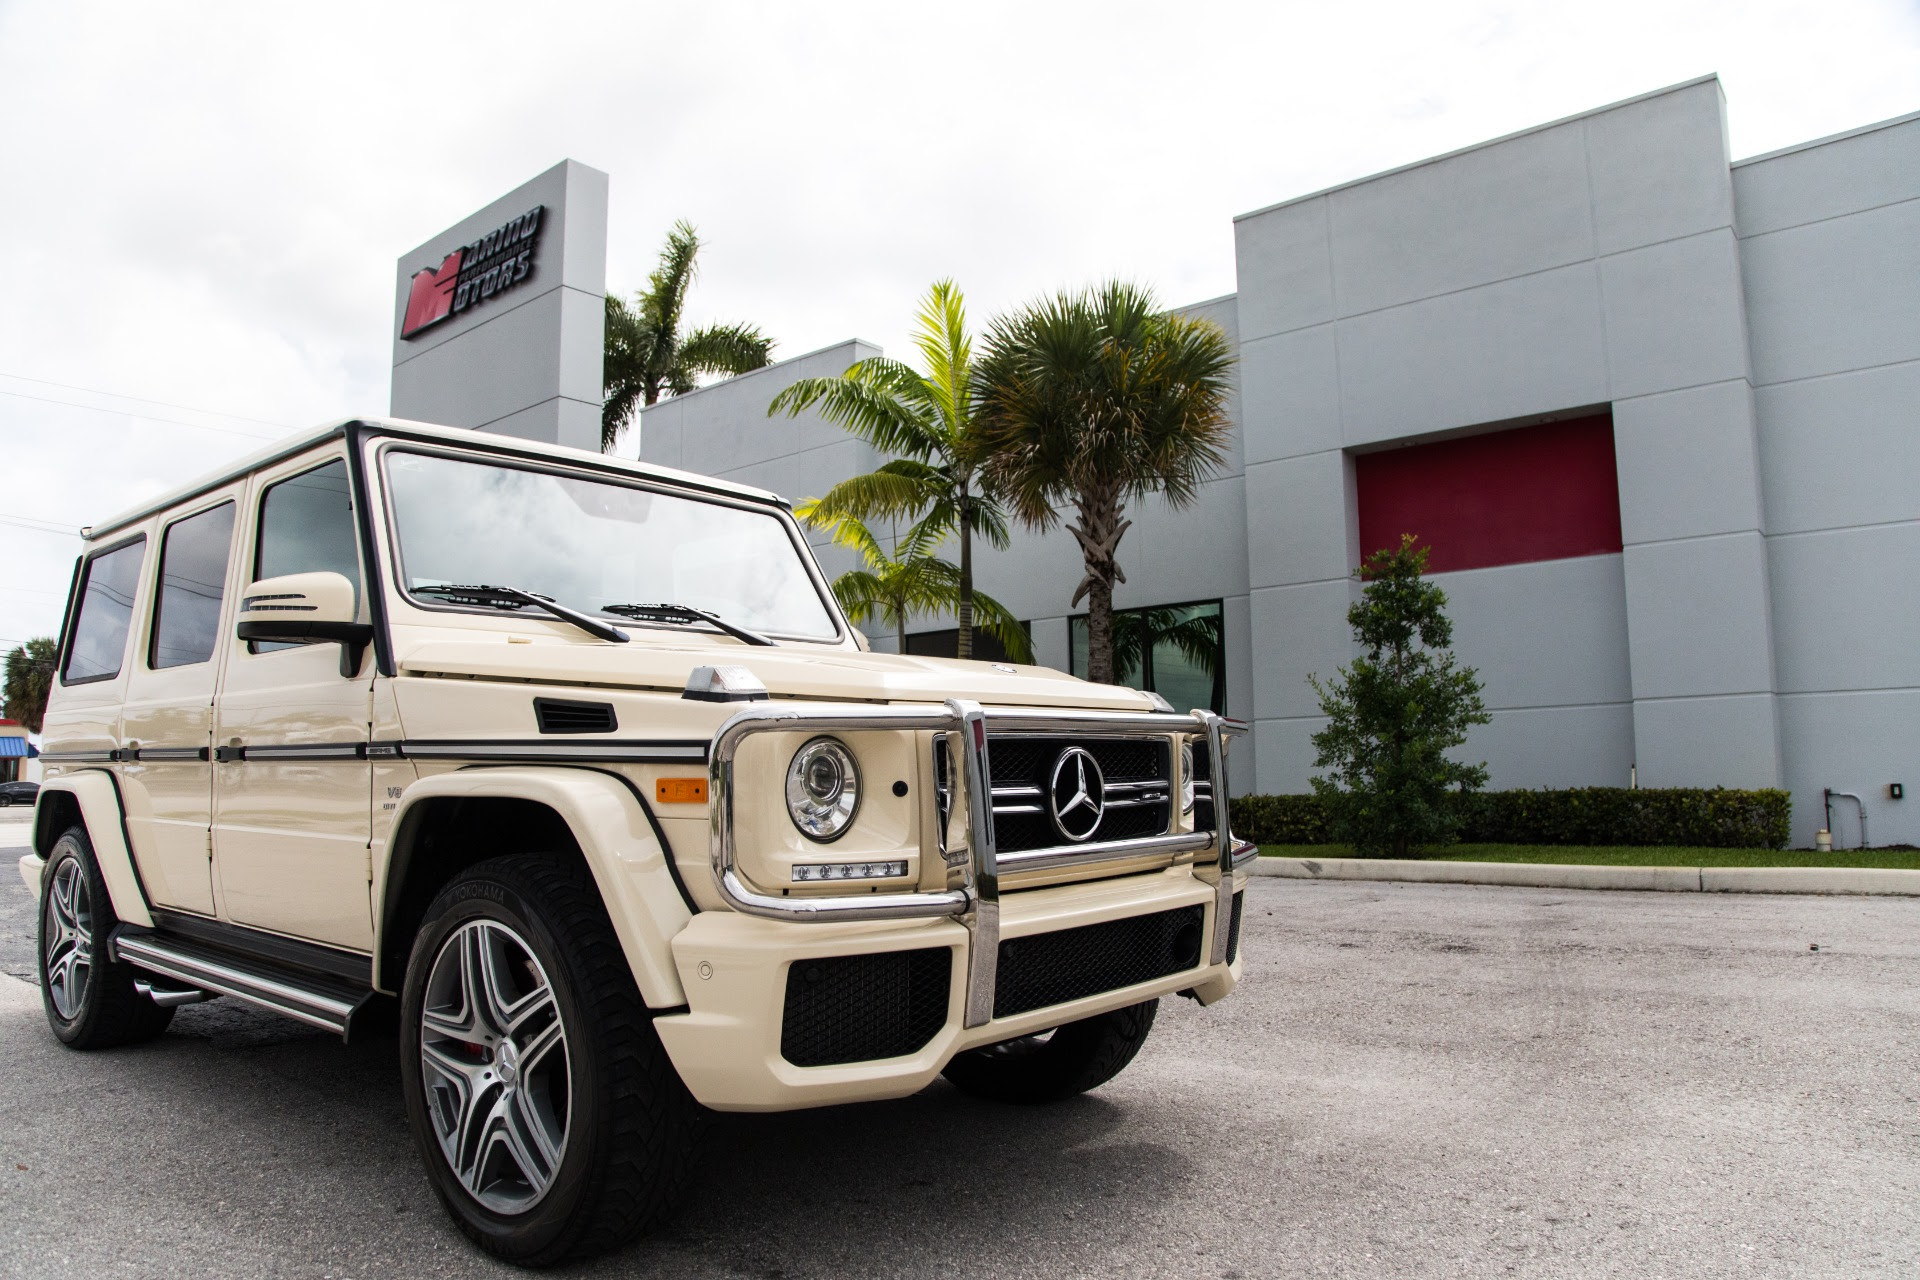 Used 17 Mercedes Benz G Class Amg G 63 For Sale 109 900 Marino Performance Motors Stock